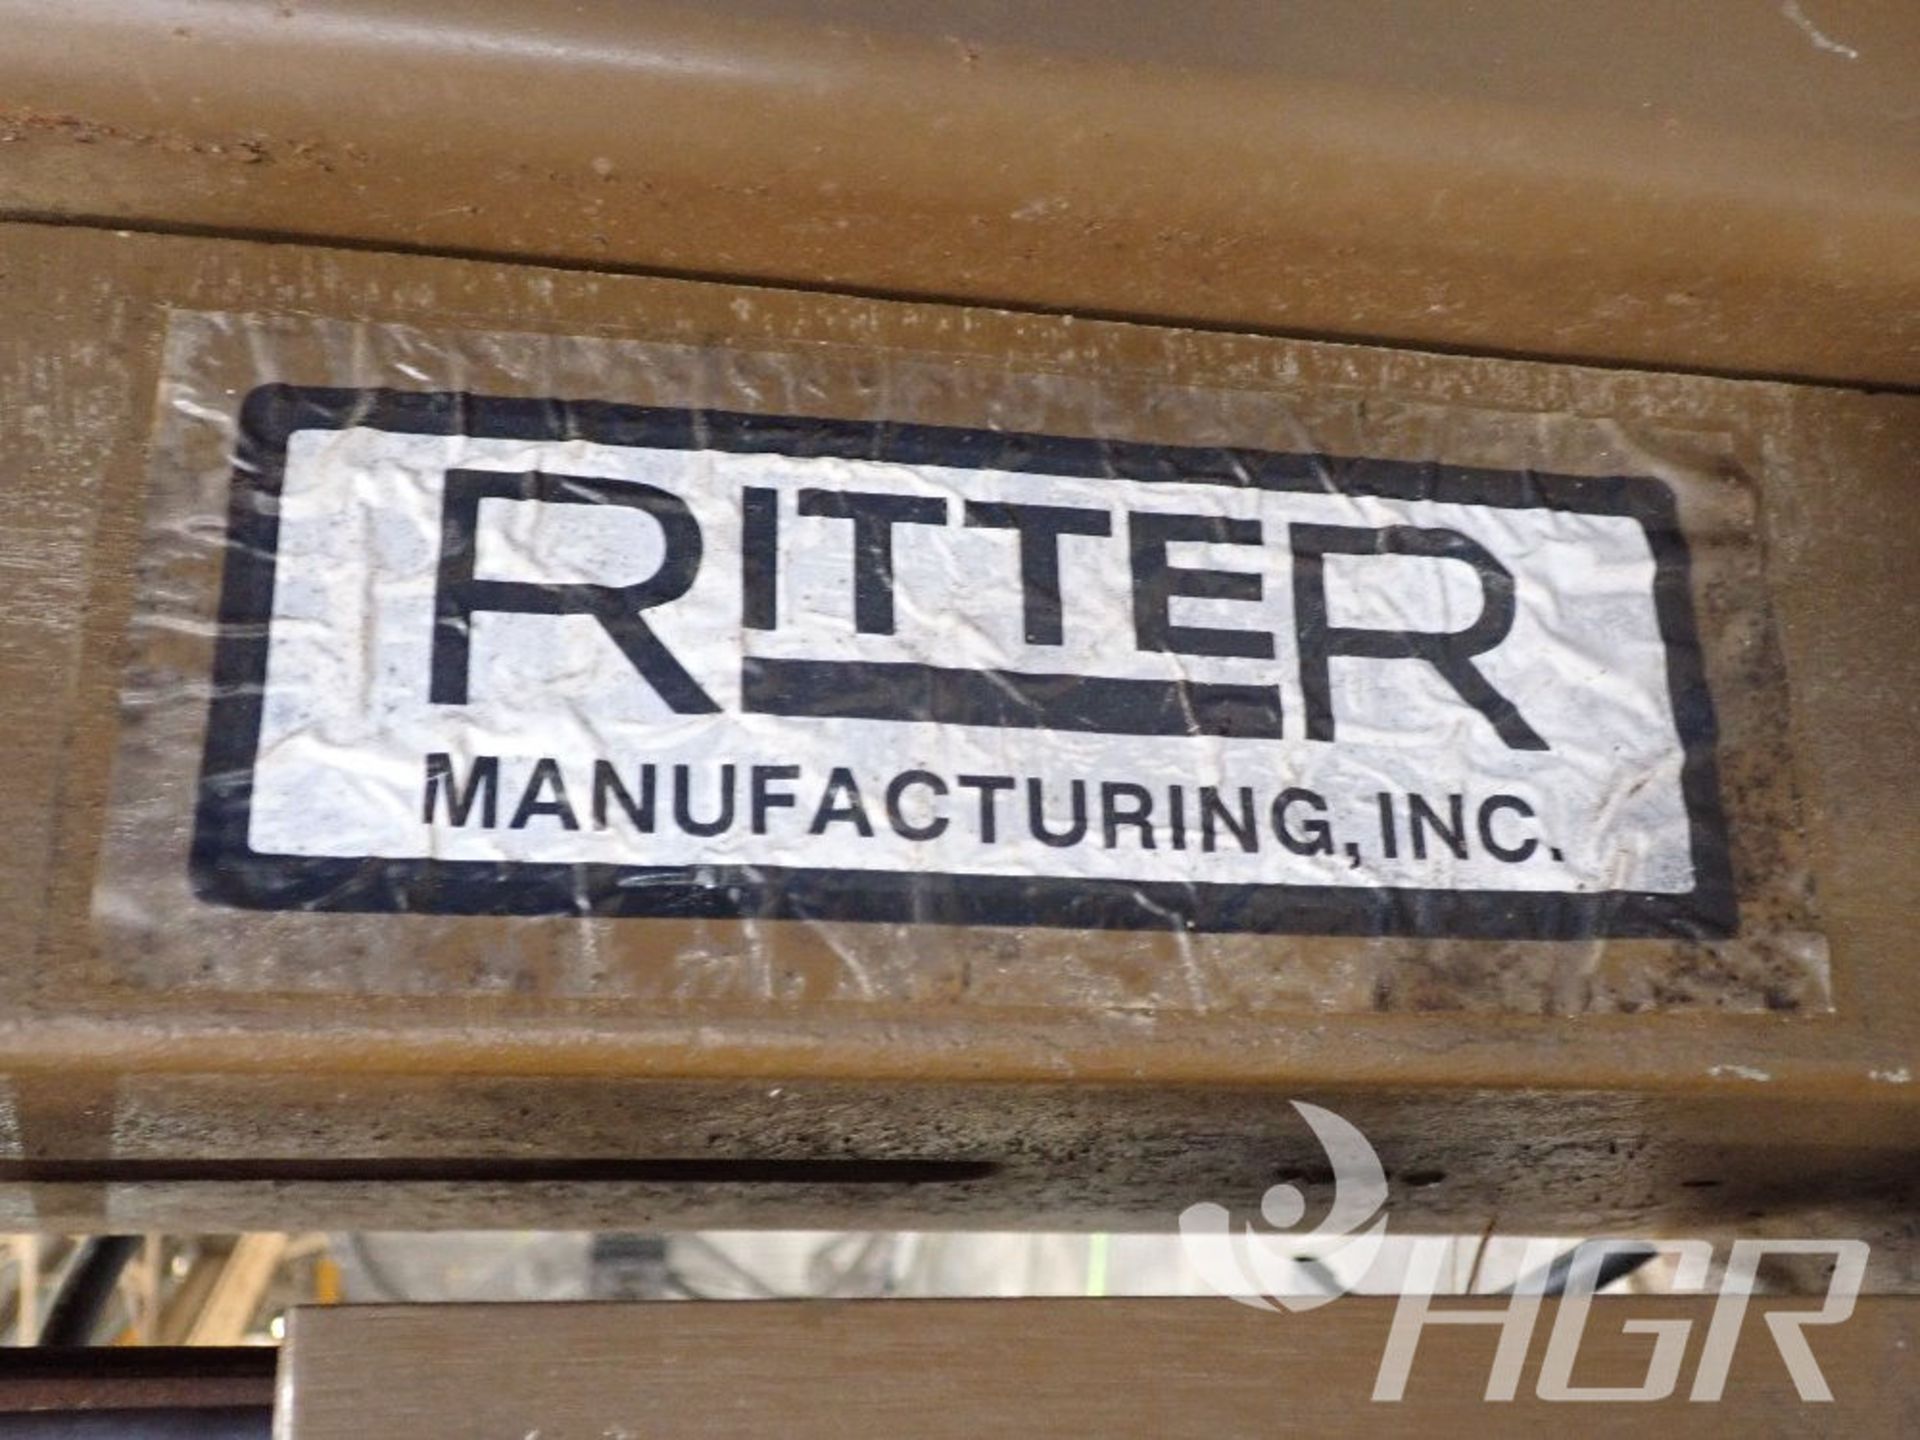 RITTER LINE BORING MACHINE, Model R123, Date: n/a; s/n 274, Approx. Capacity: n/a, Power: 3/60/ - Image 12 of 12